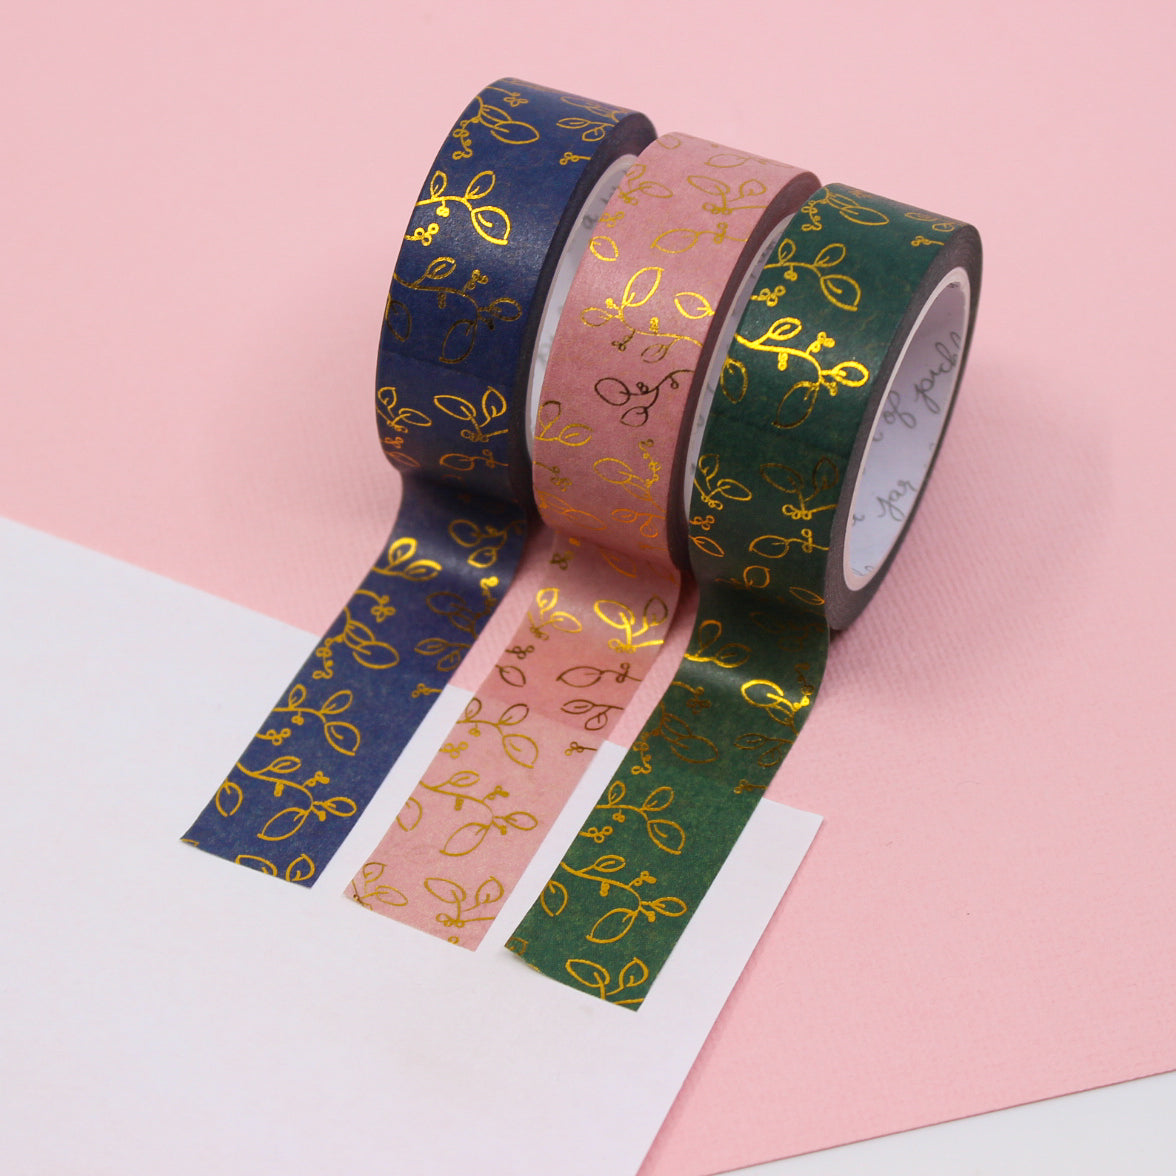 Gold Foil Vine Washi Tape adds a touch of elegance and nature-inspired beauty to your projects. The gold foil accents shimmer in the light, enhancing the intricate vine pattern. Perfect for adding a luxurious and organic feel to your crafts, scrapbooking, or journaling. This tape is from A Jar of Pickles and sold at BBB Supplies Craft Shop.